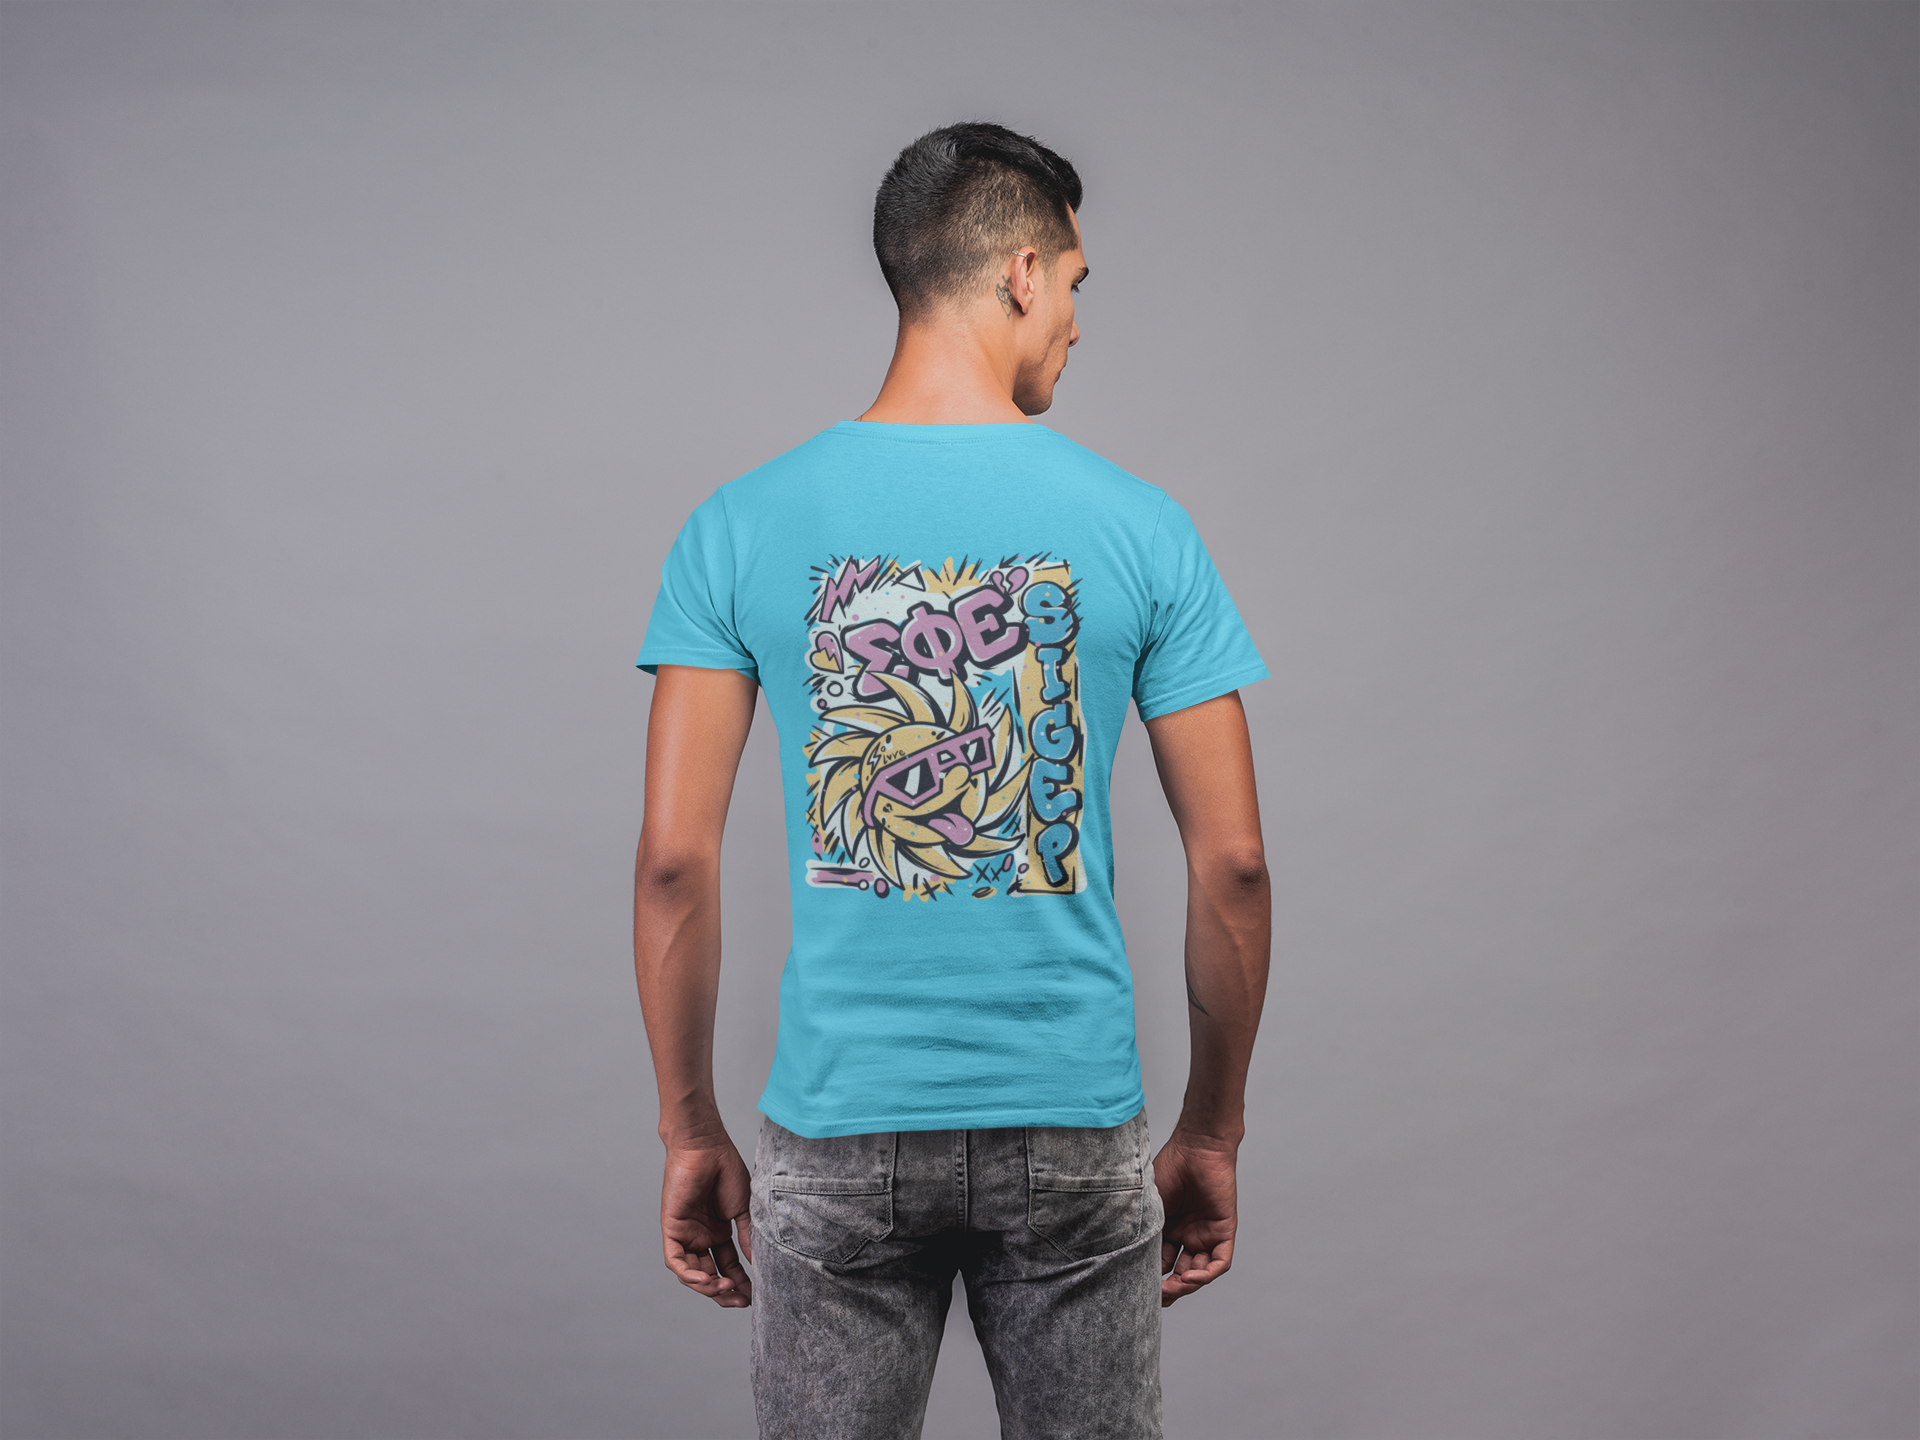 Sigma Phi Epsilon Graphic T-Shirt | Fun in the Sun | SigEp Clothing - Campus Apparel back model 